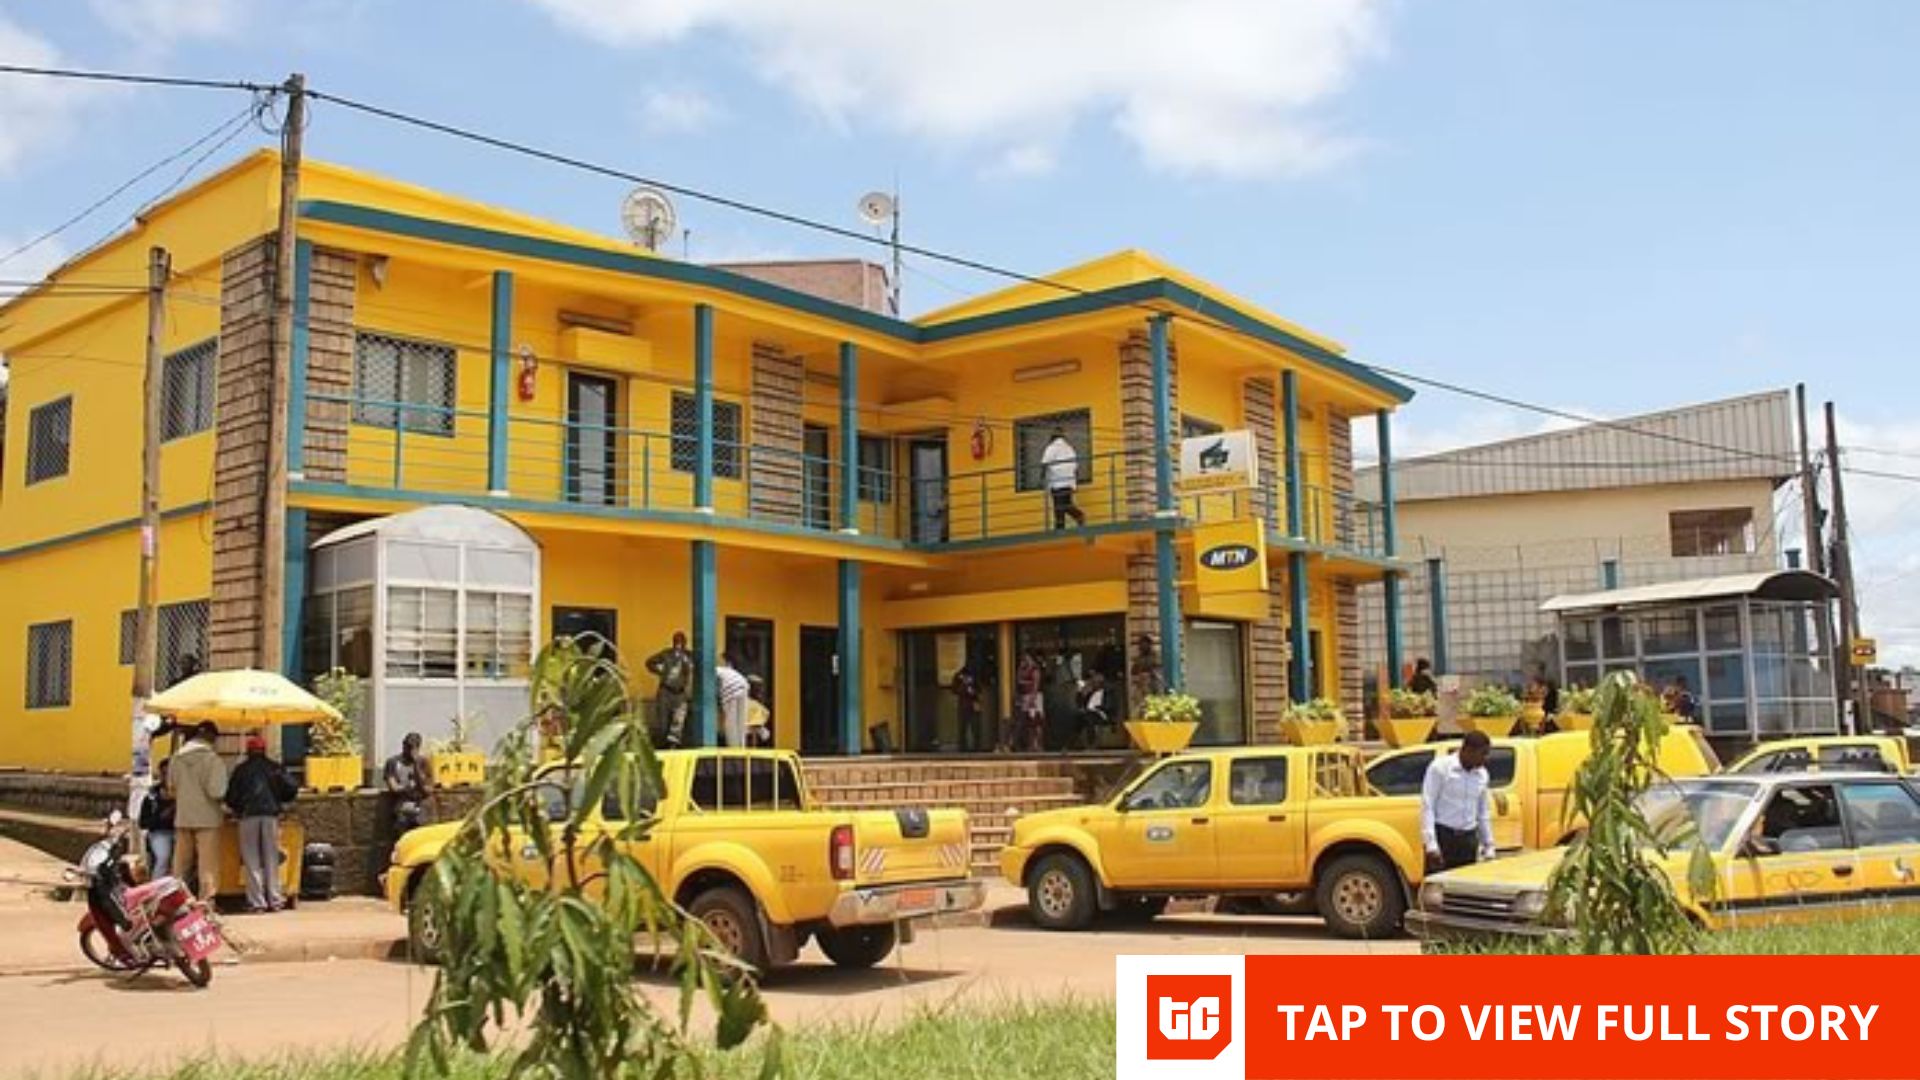 MTN exits two African international locations in a bid to refocus on high-growth markets